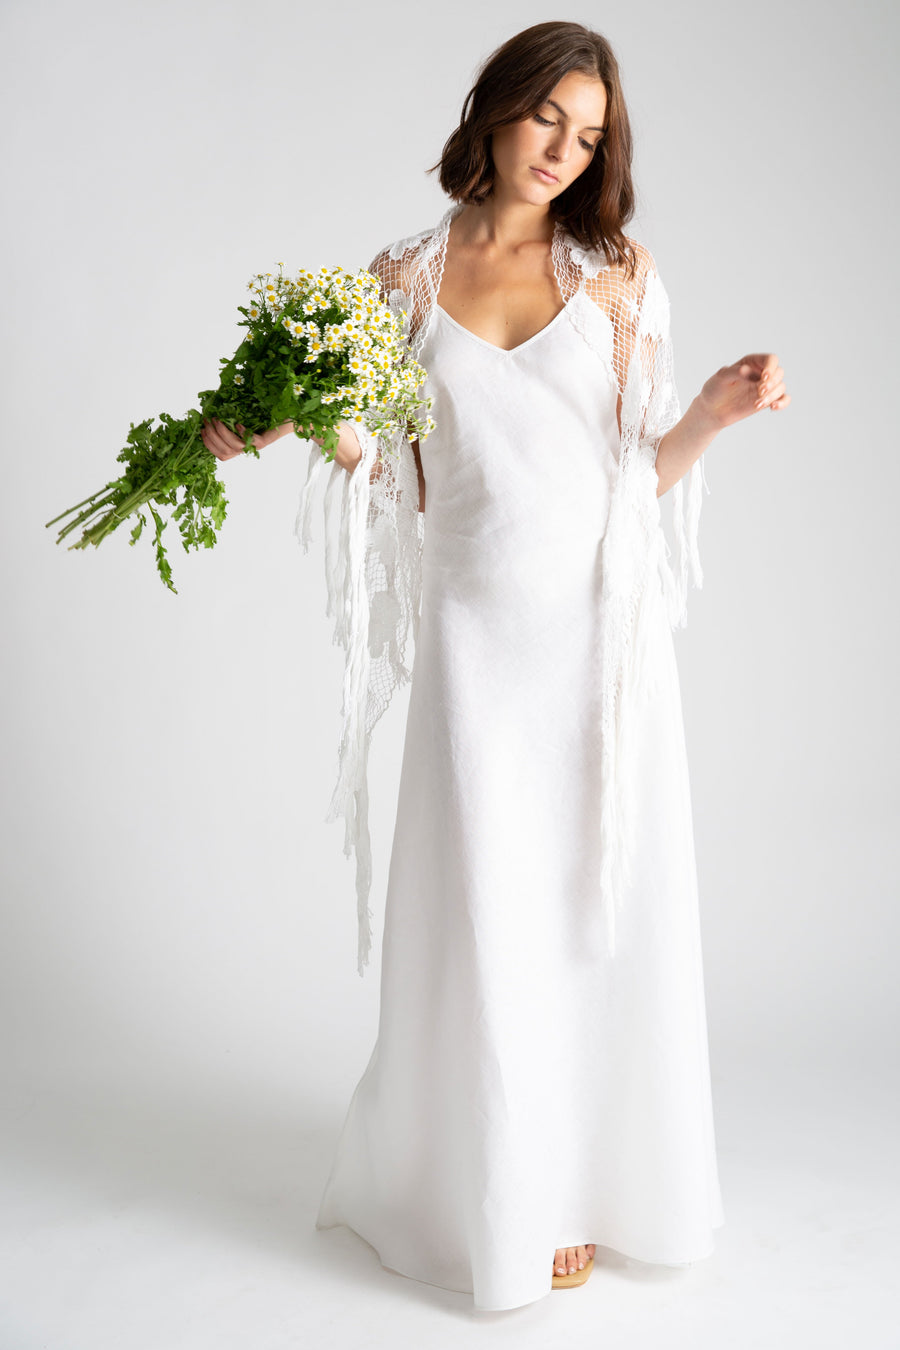 This is a photo of a woman wearing a white linen slip dress with v neck front and side leg slit. Over the slip dress, she wears a white hand knit shawl and holds a bouquet of daisy flowers.